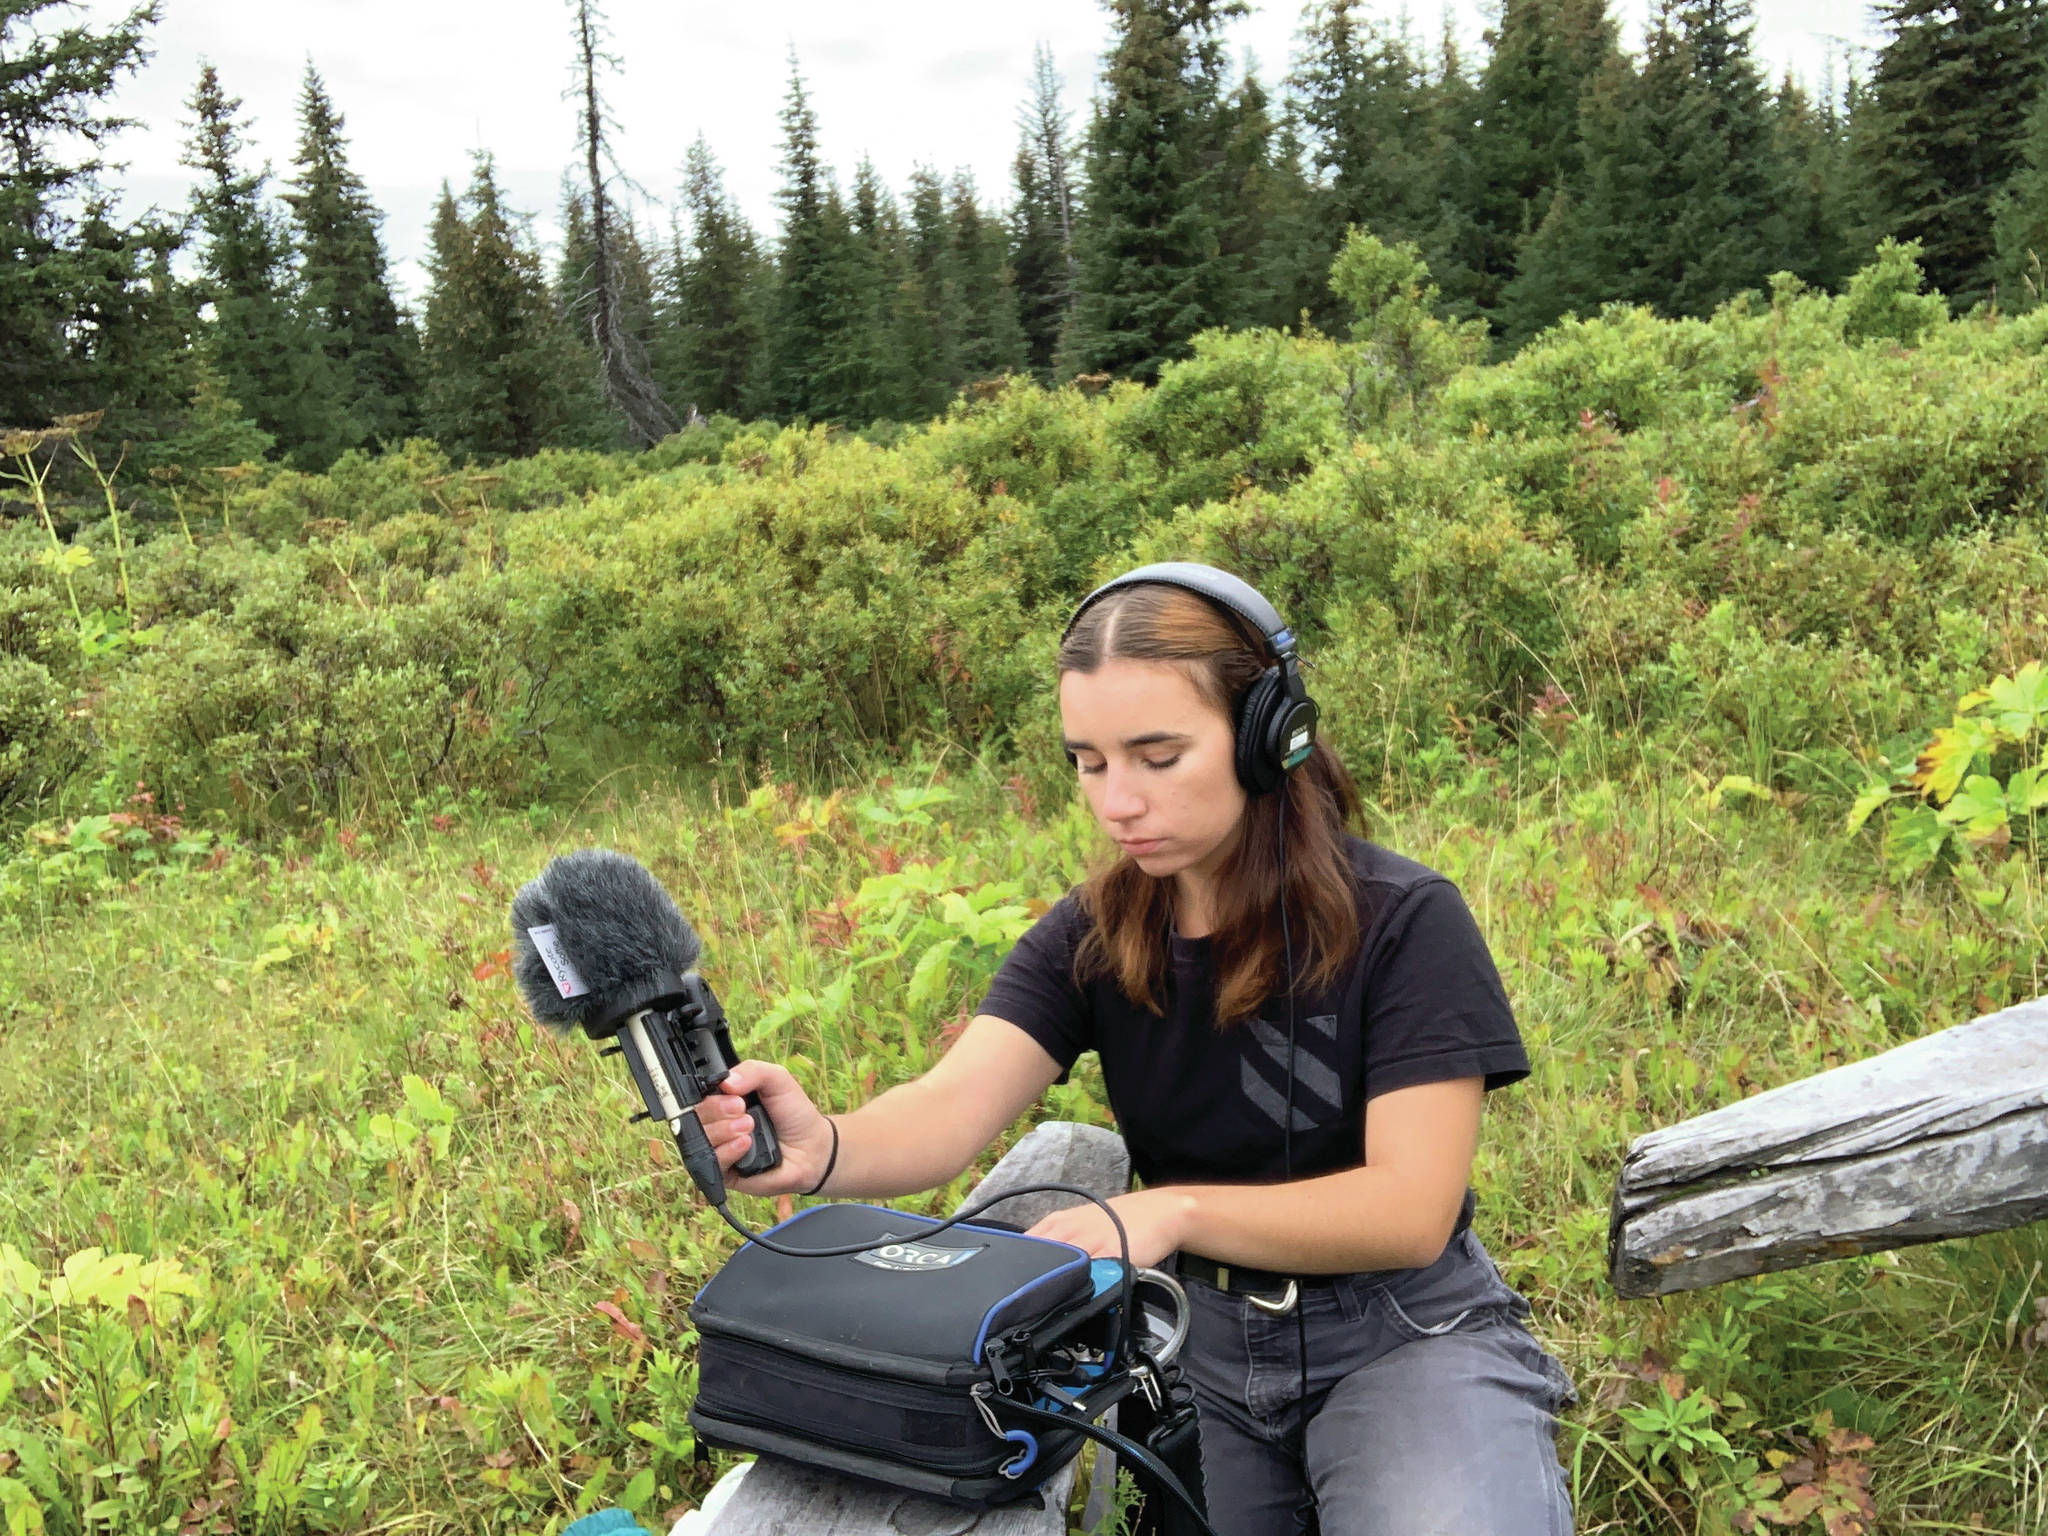 Lindsey Schneider records nature sounds for her radio play, “Knife Skills,” in August 2020 in Homer, Alaska. (Photo courtesy of Lindsey Schneider)